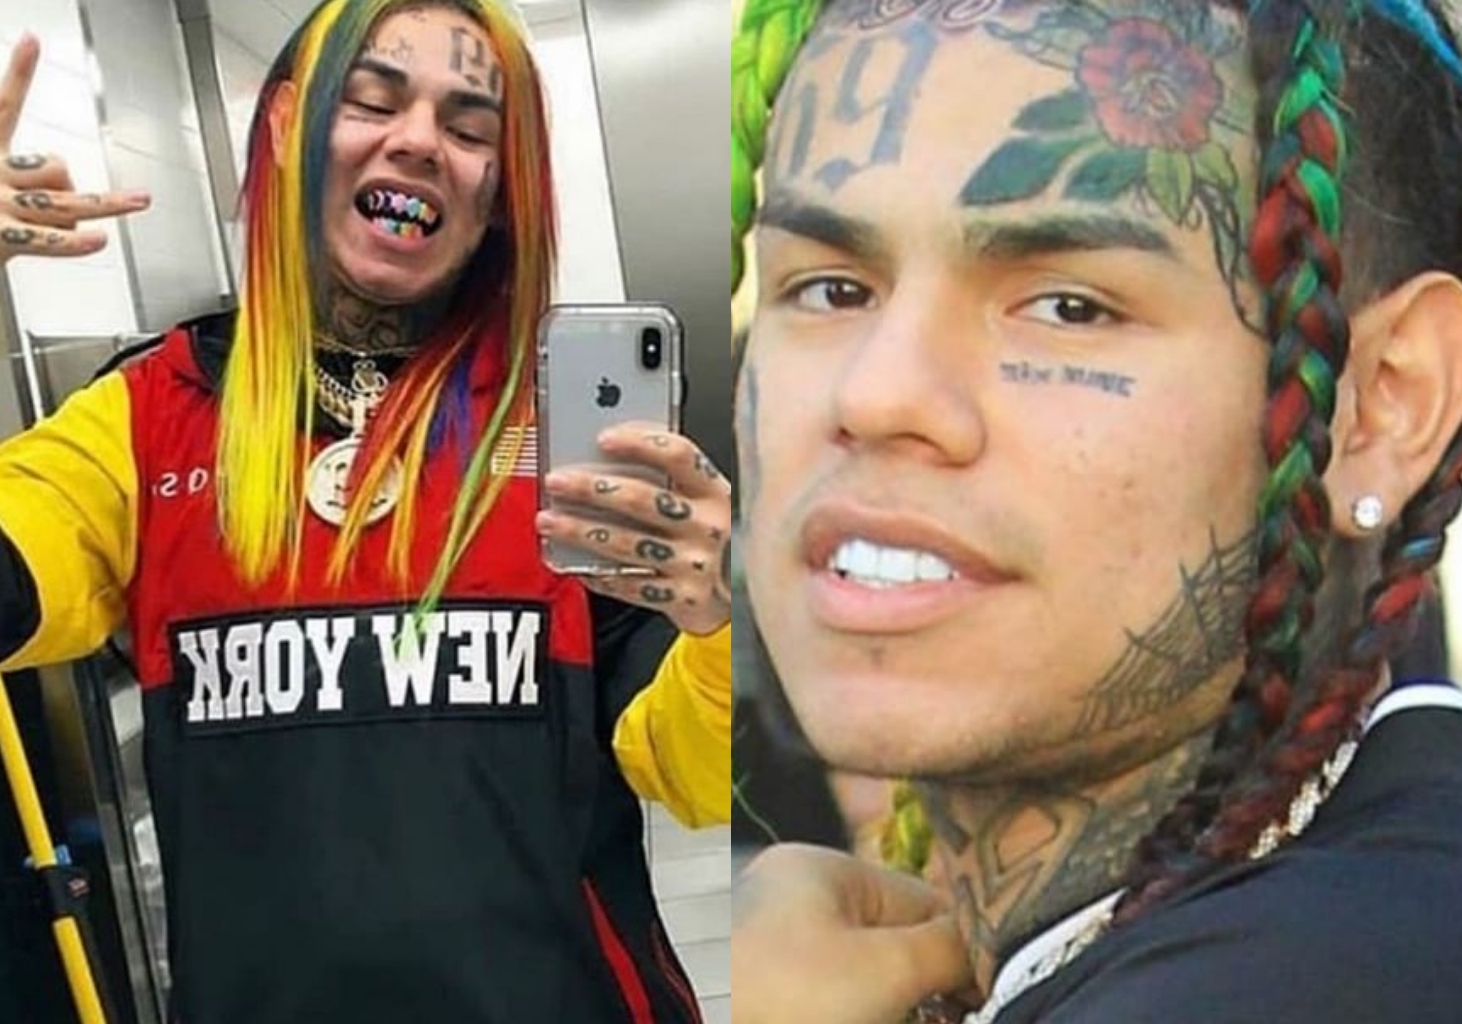 Tekashi69 has been raising eyebrows ever since he was. released from prison...